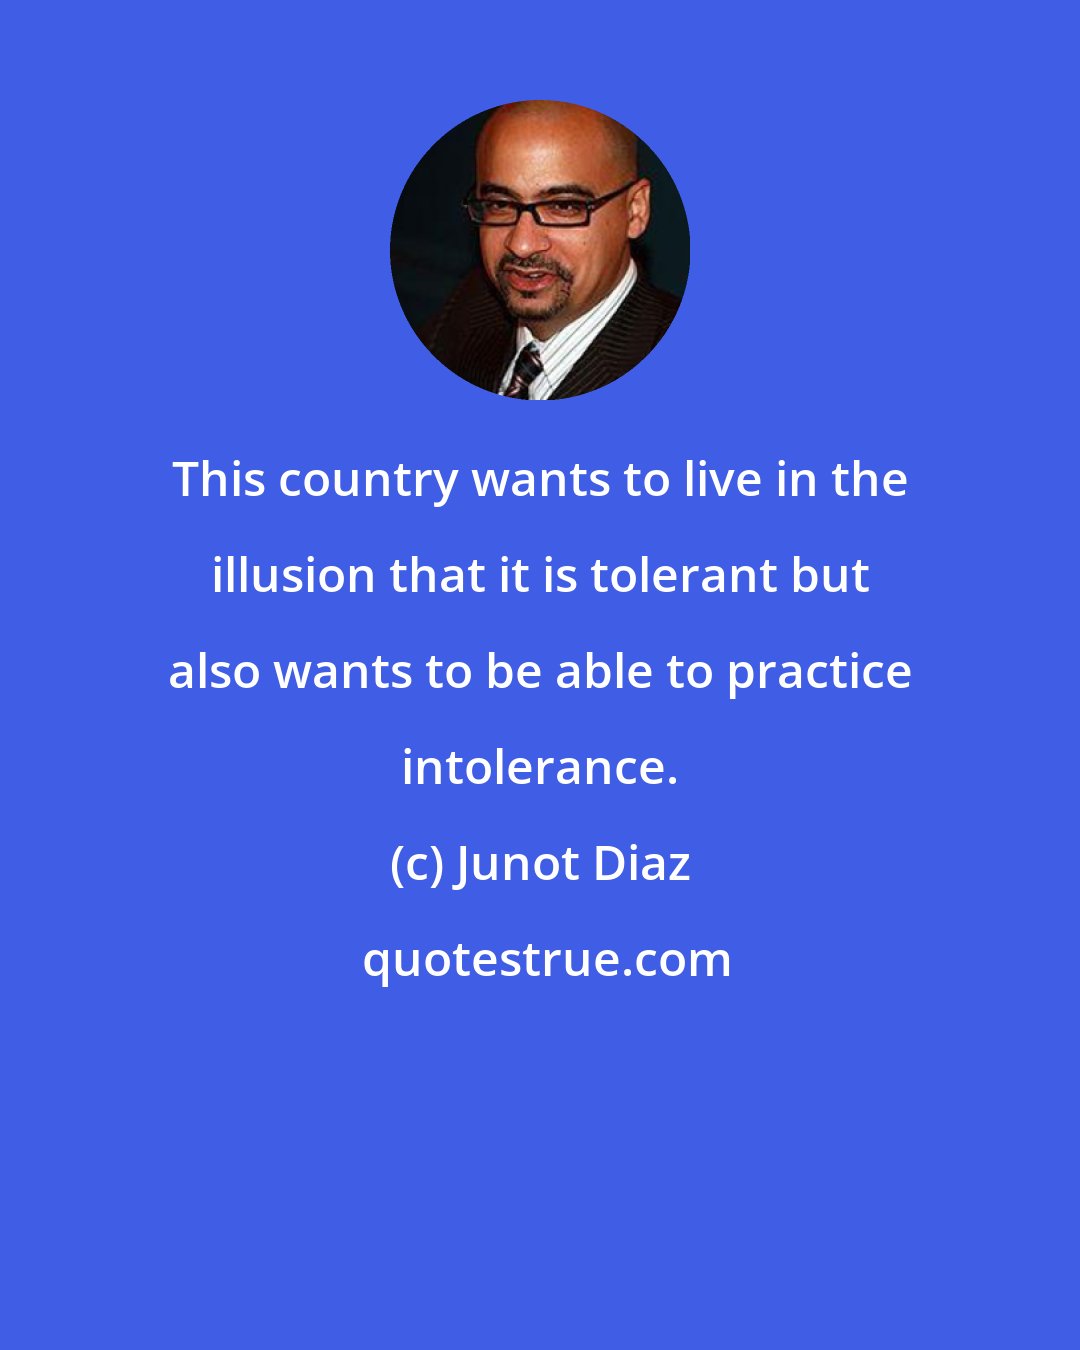 Junot Diaz: This country wants to live in the illusion that it is tolerant but also wants to be able to practice intolerance.